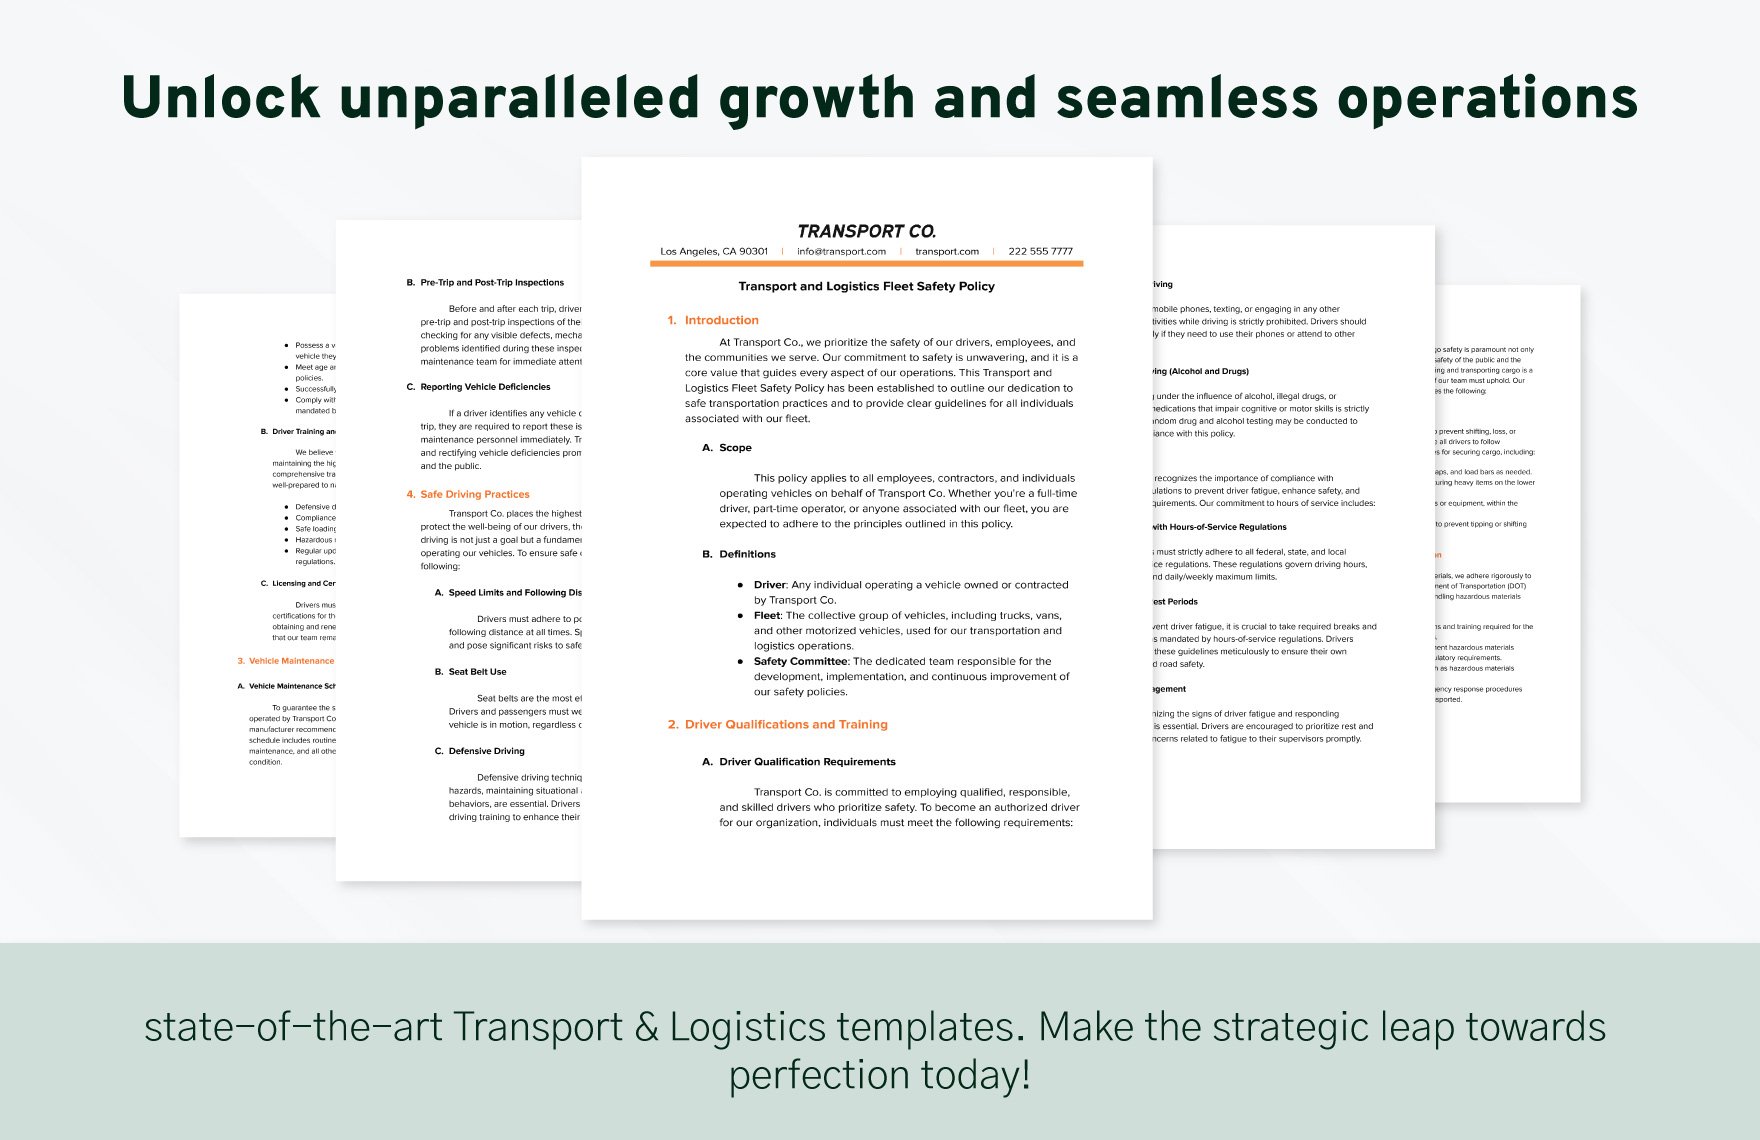 Transport and Logistics Fleet Safety Policy Template